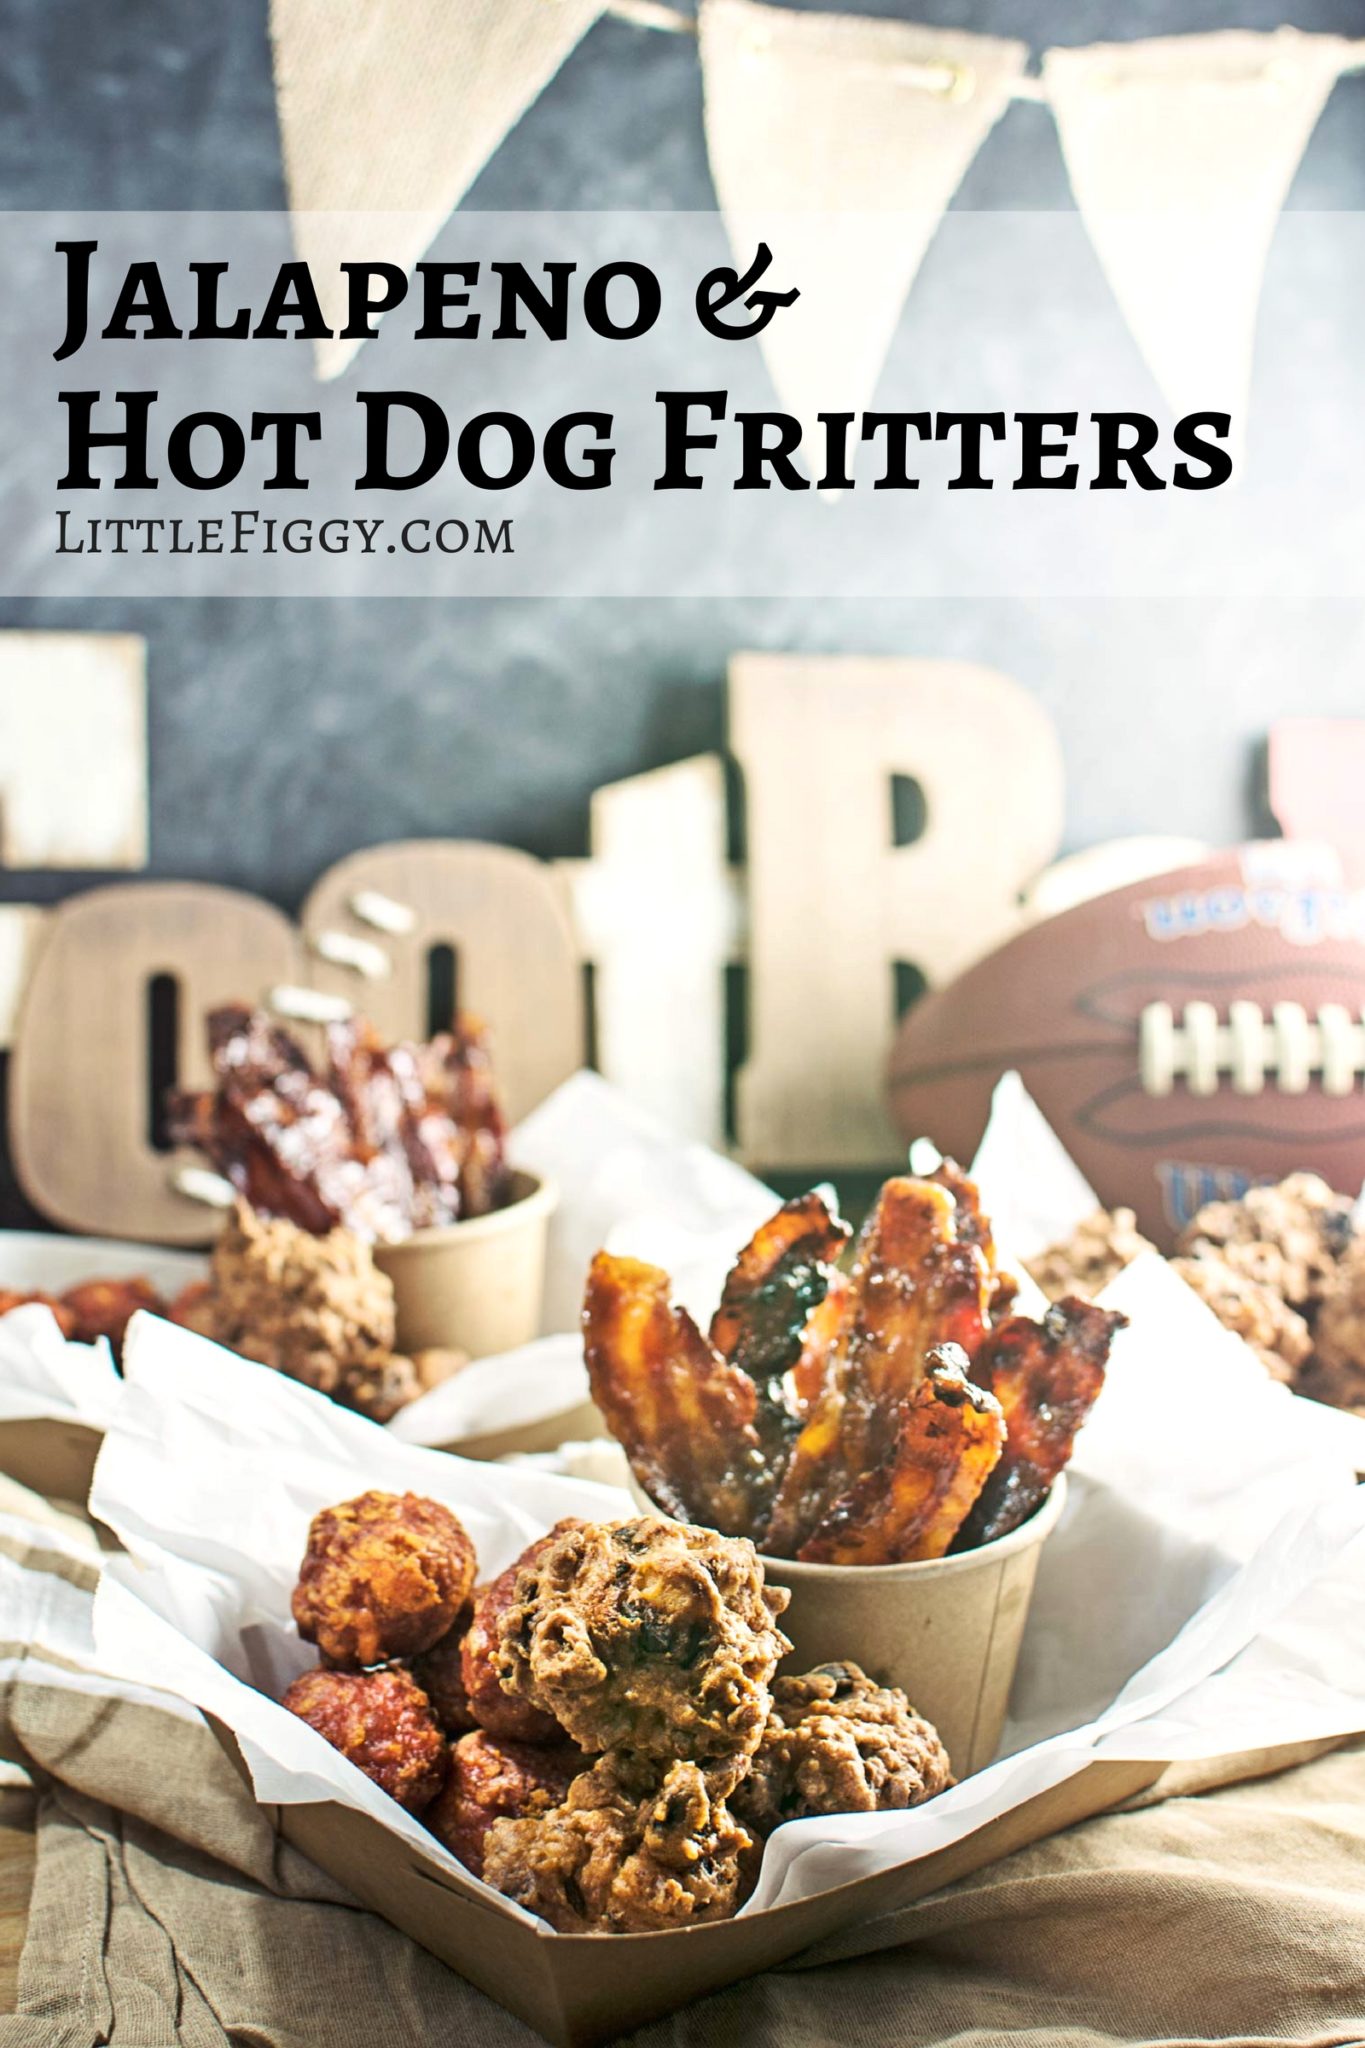 Enjoy some #fanfoodleague for the Big Game with these Jalapeno Hot Dog Fritters! Recipe @LittleFiggyFood #ad